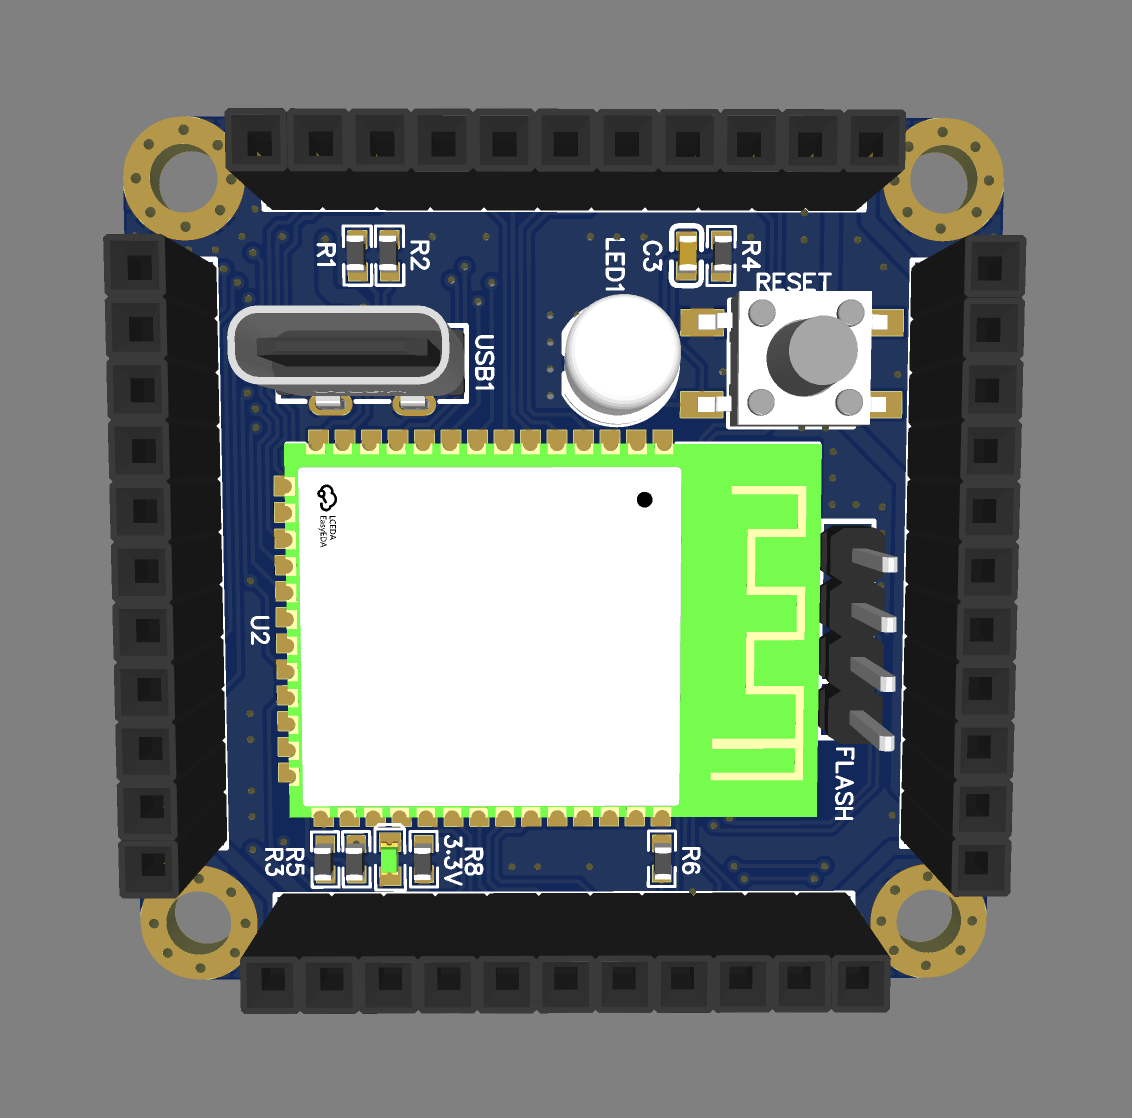 The first version of the CPU module with dimensions of 42x42 mm